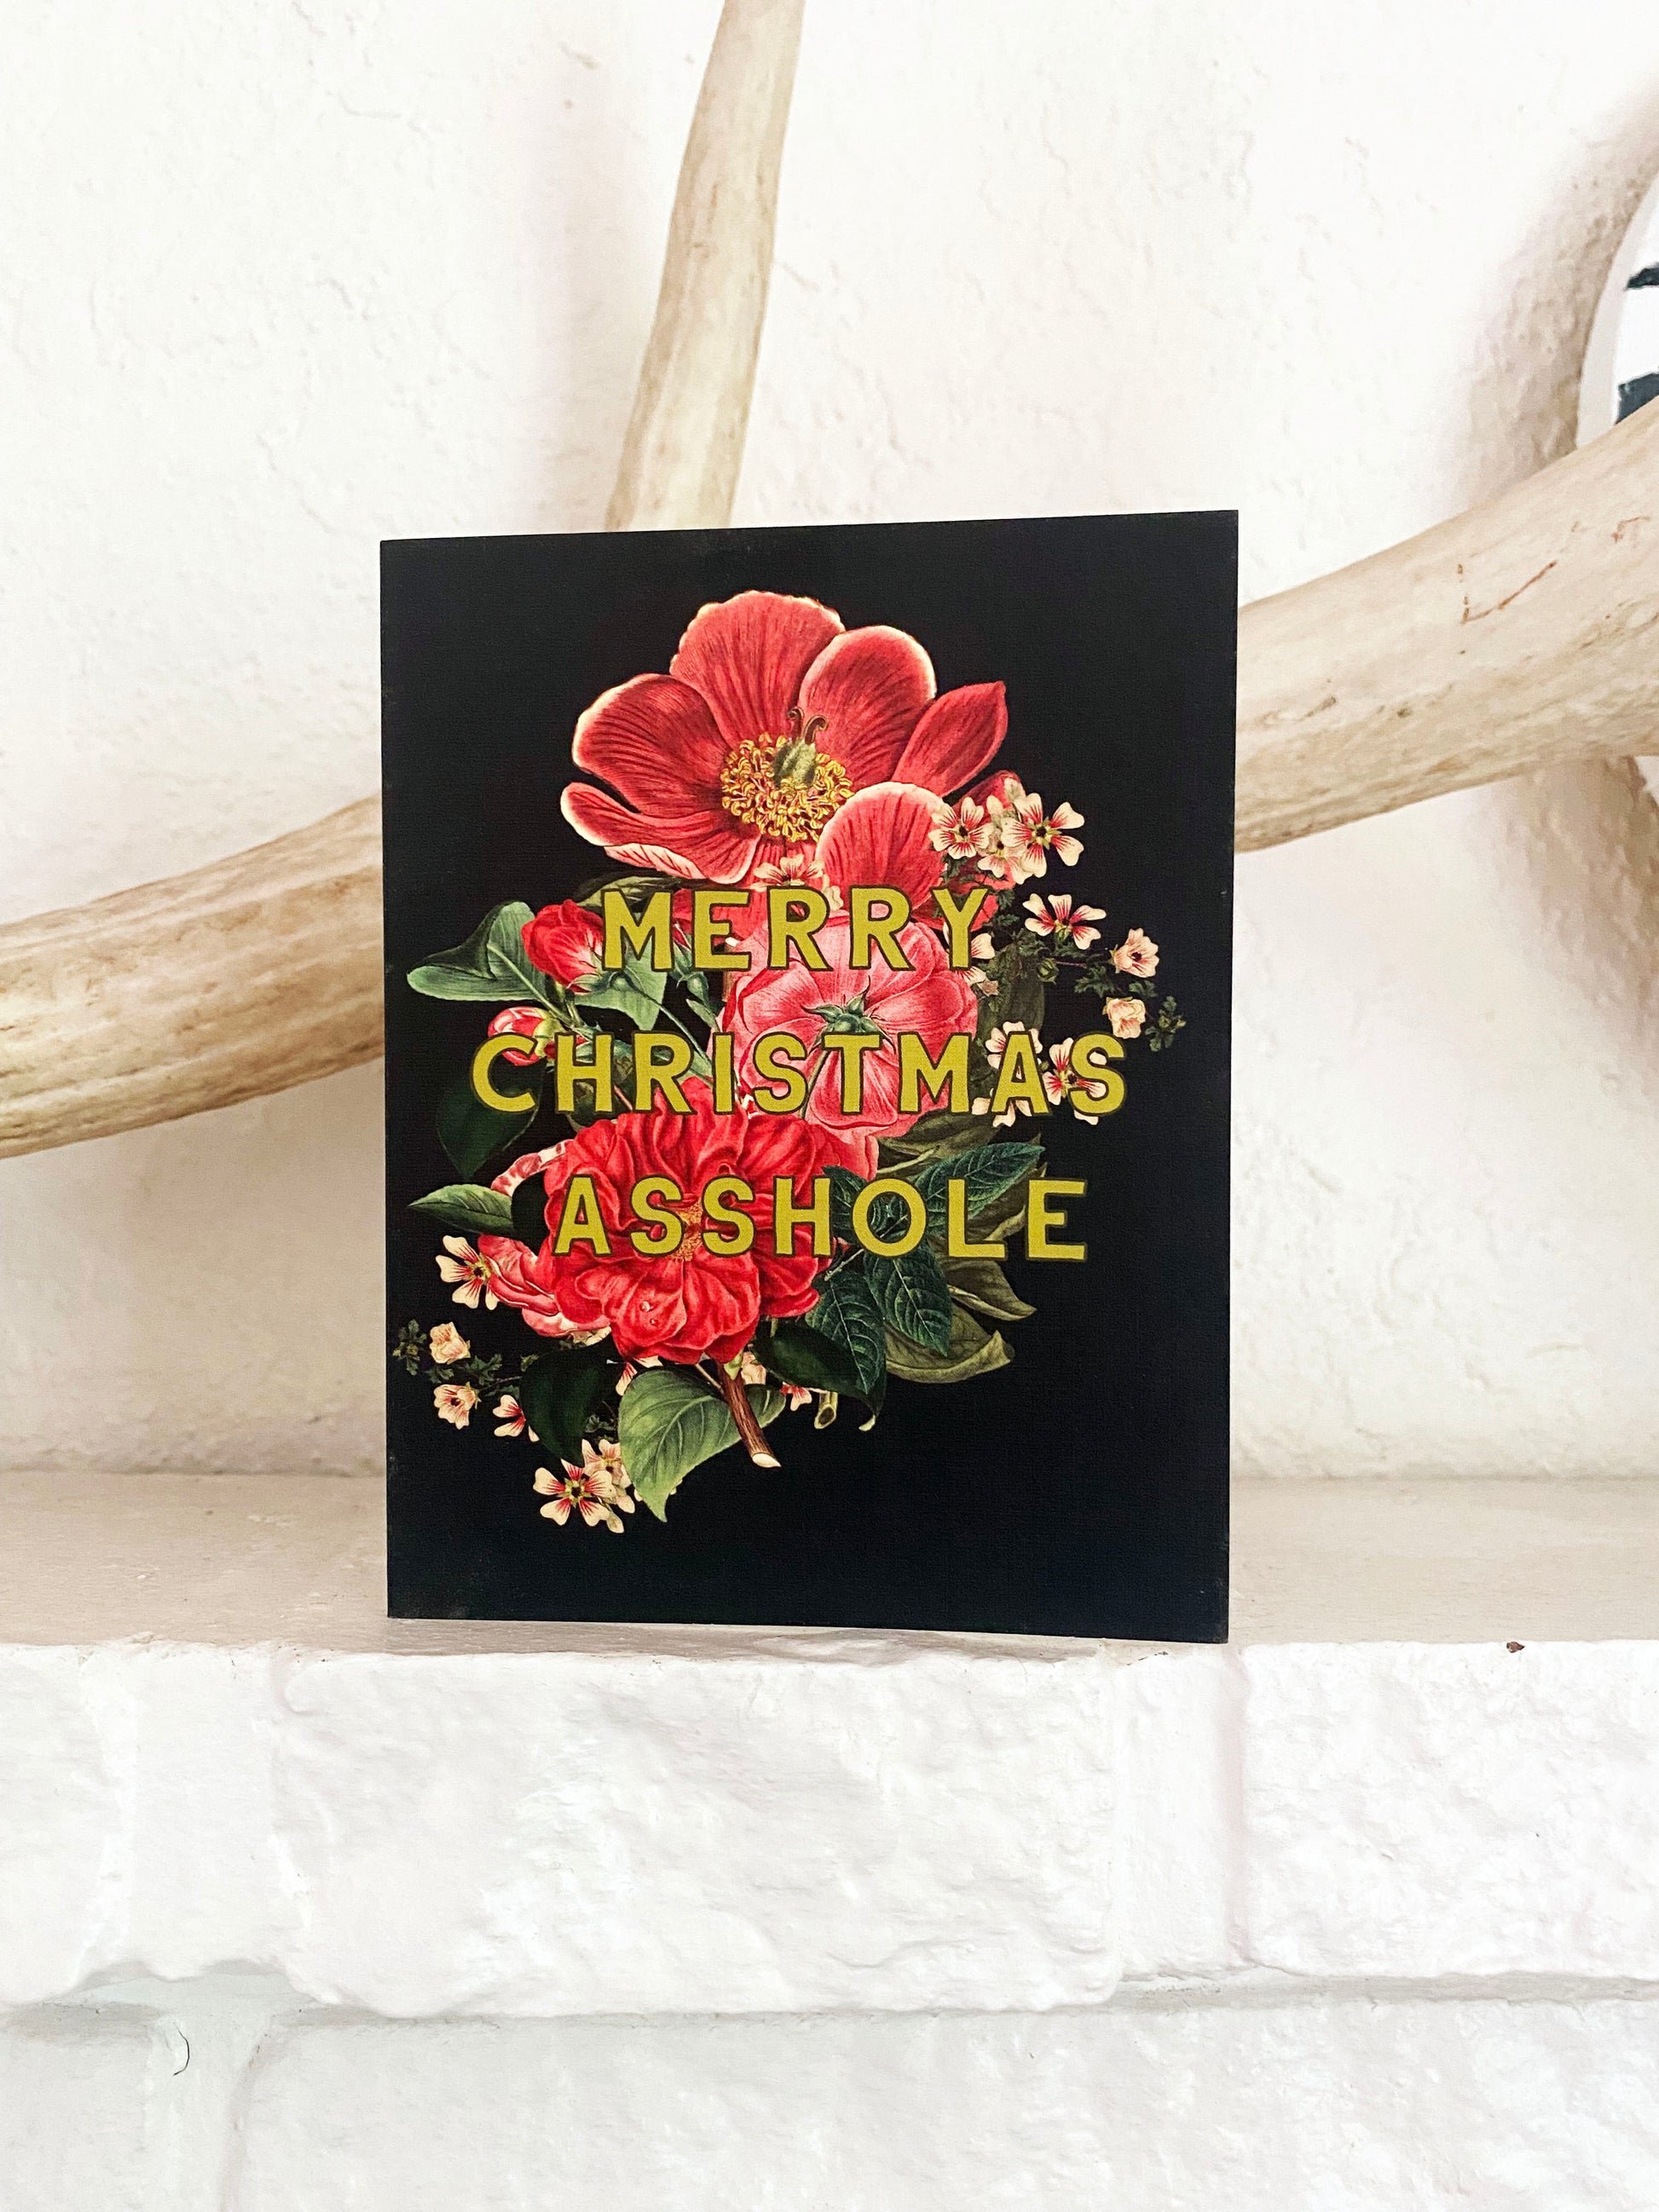 funny christmas cards greeting card merry christmas asshole retro vintage floral flowers cute blank inside holiday gift rifle paper company coin laundry funny cards montana made holiday cards for family fun